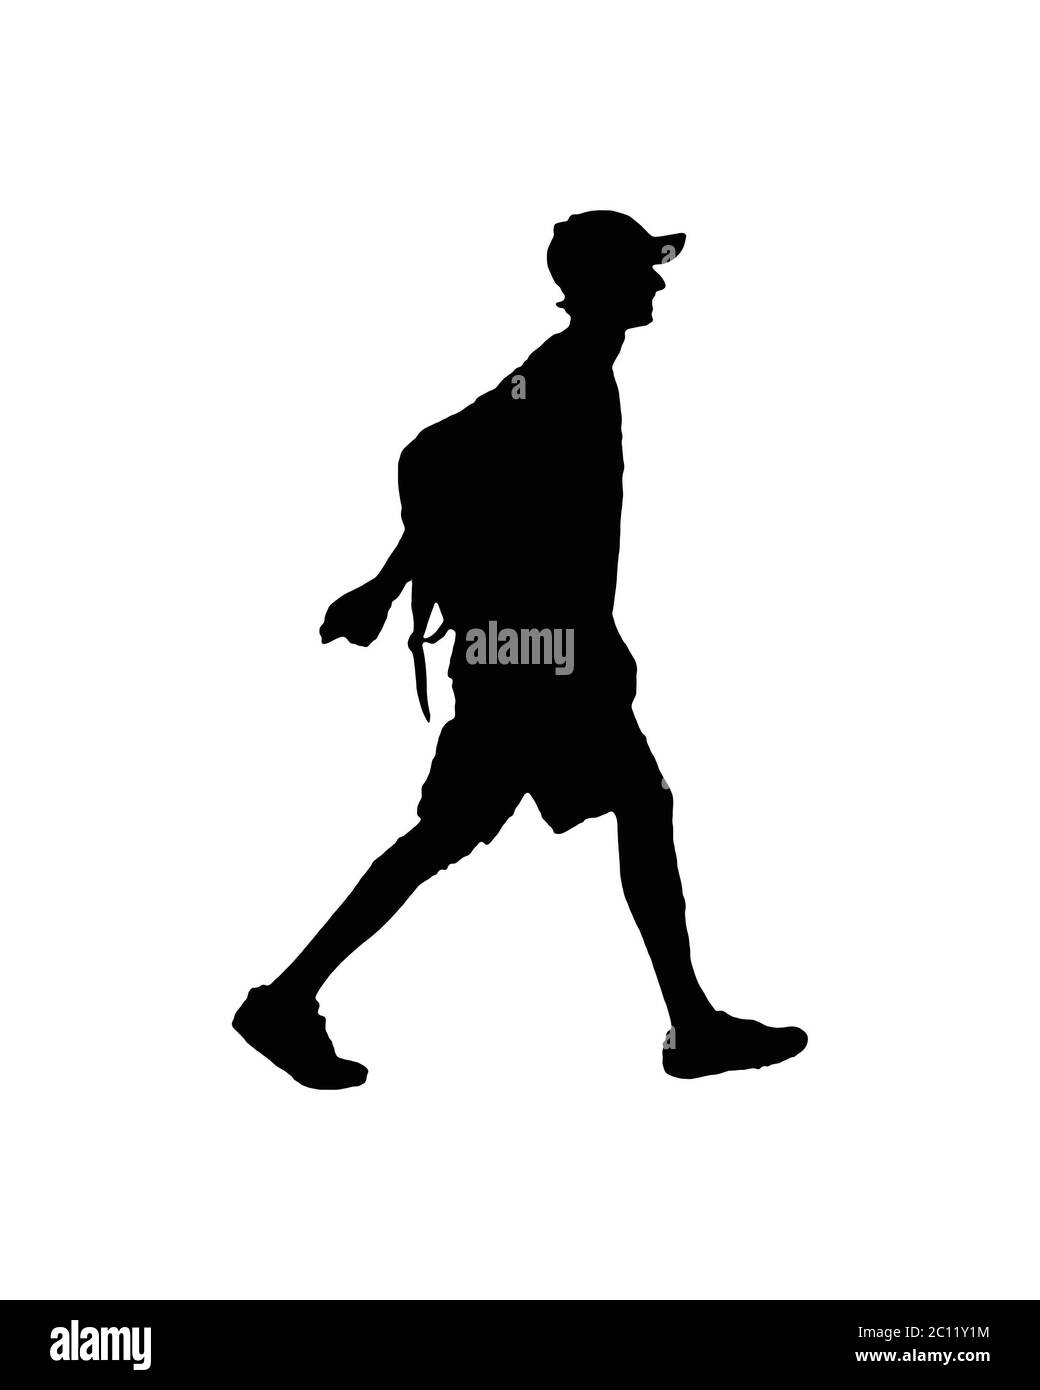 Slim Young Backpacker Man Walking Silhouette Stock Photo